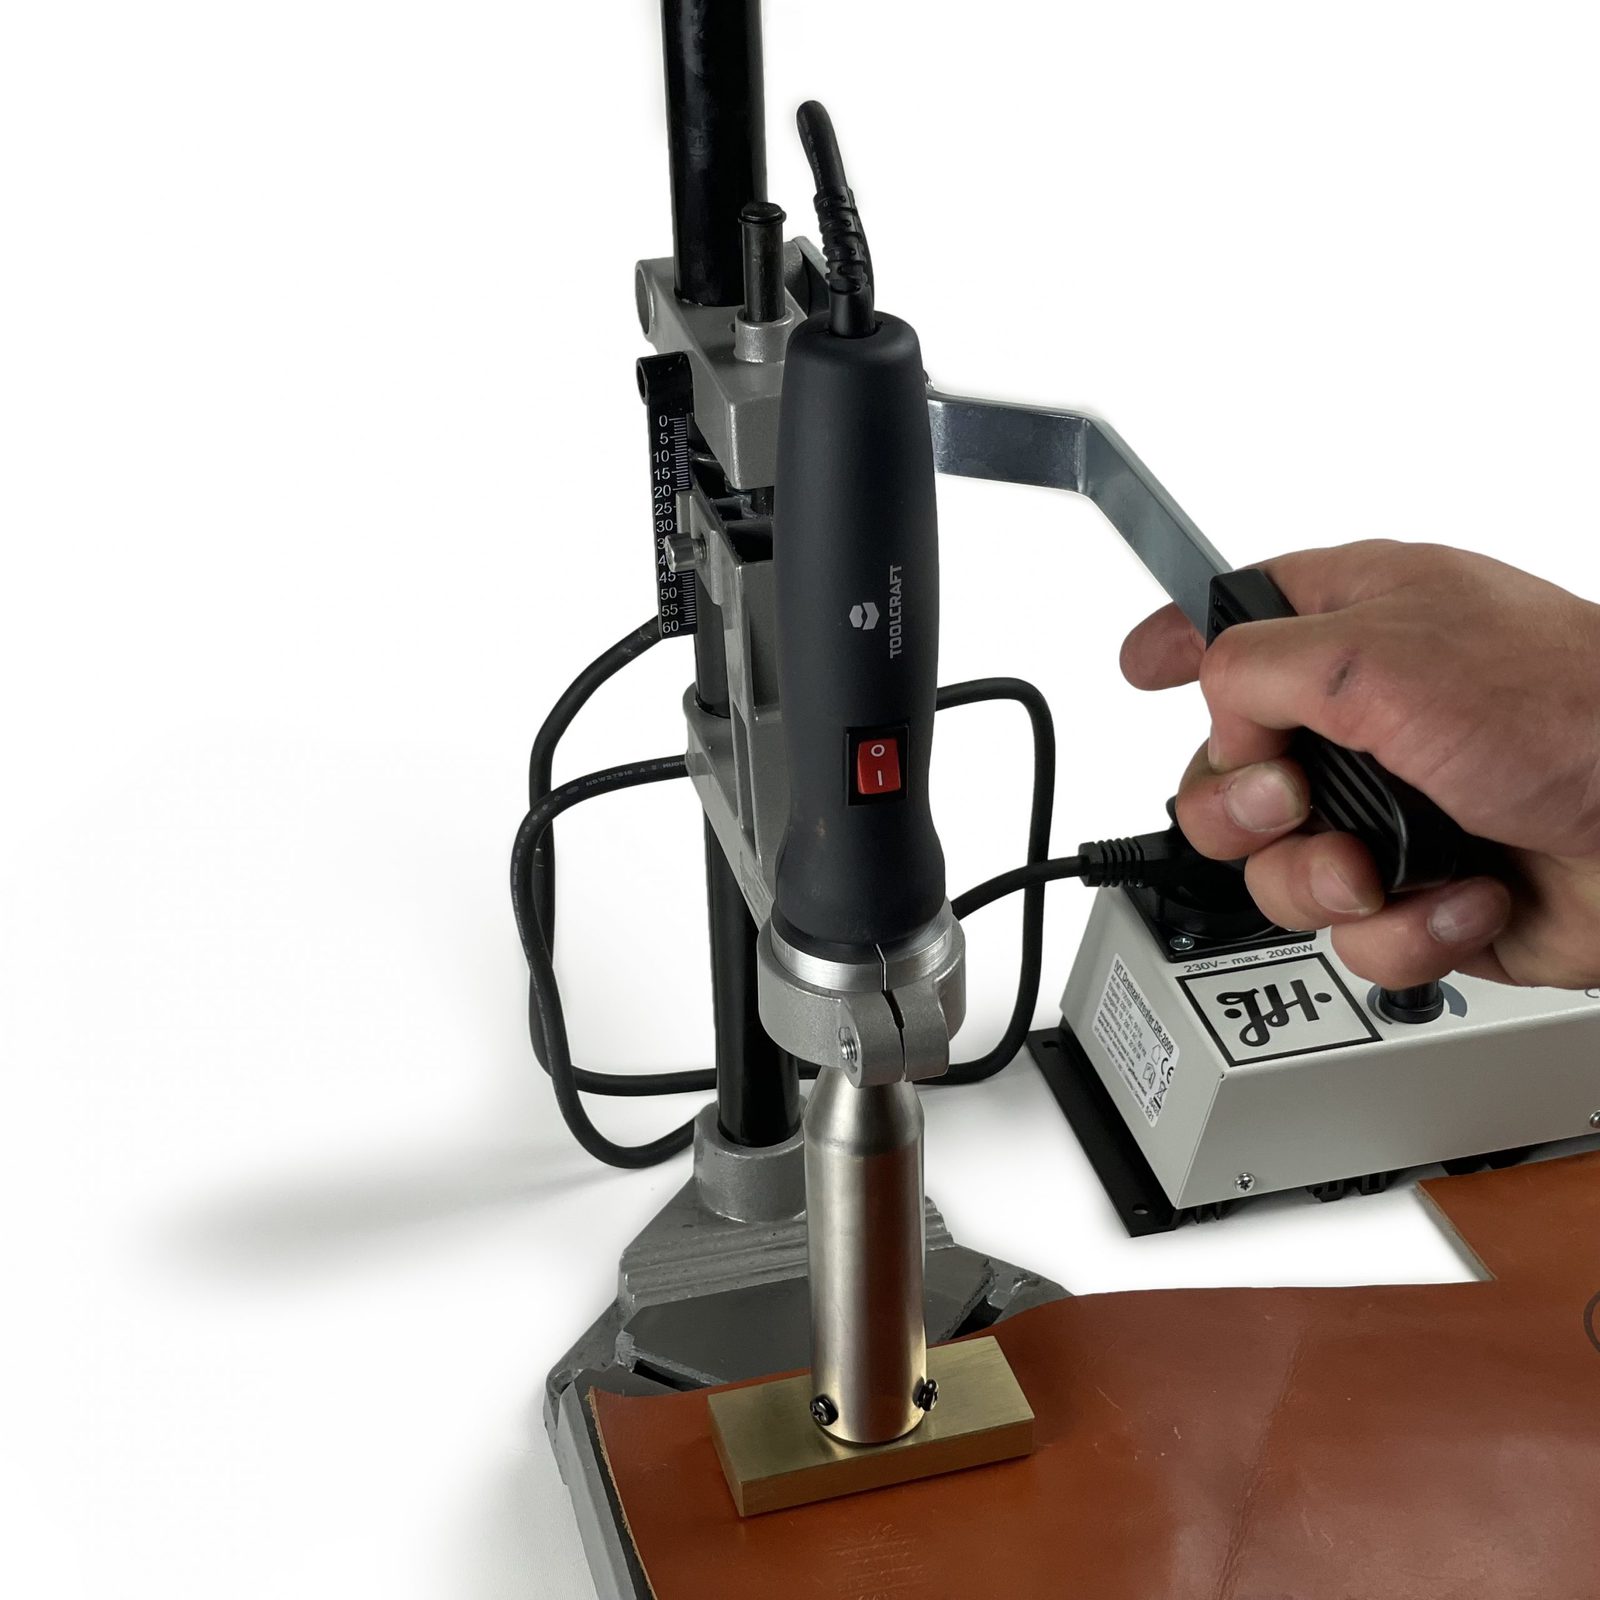 Stand for electric branding irons